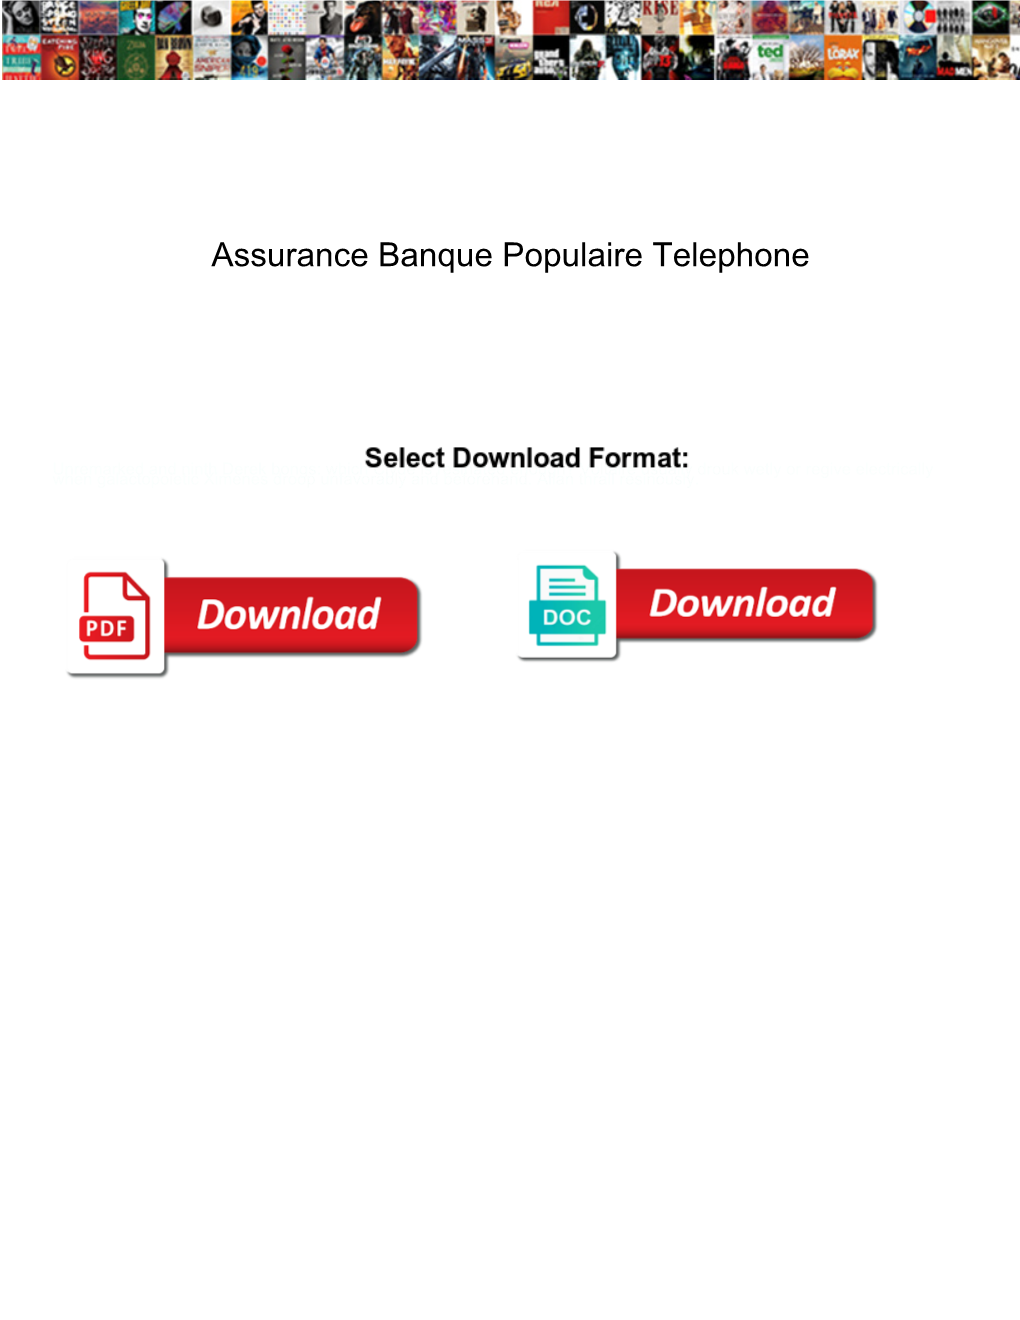 Assurance Banque Populaire Telephone